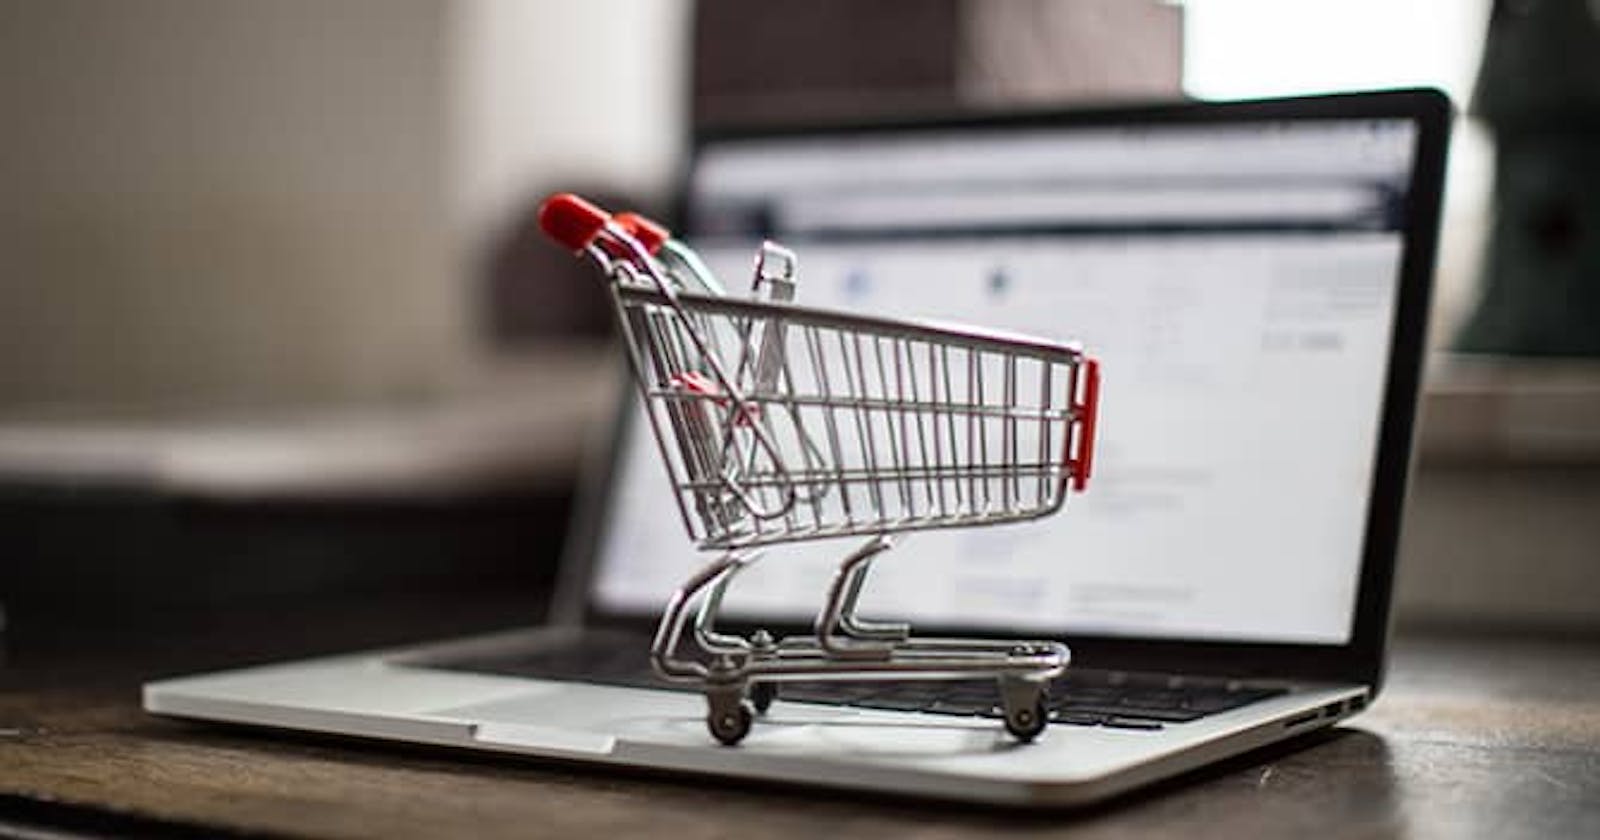 There are five ways that online retailers can give value to their customers.